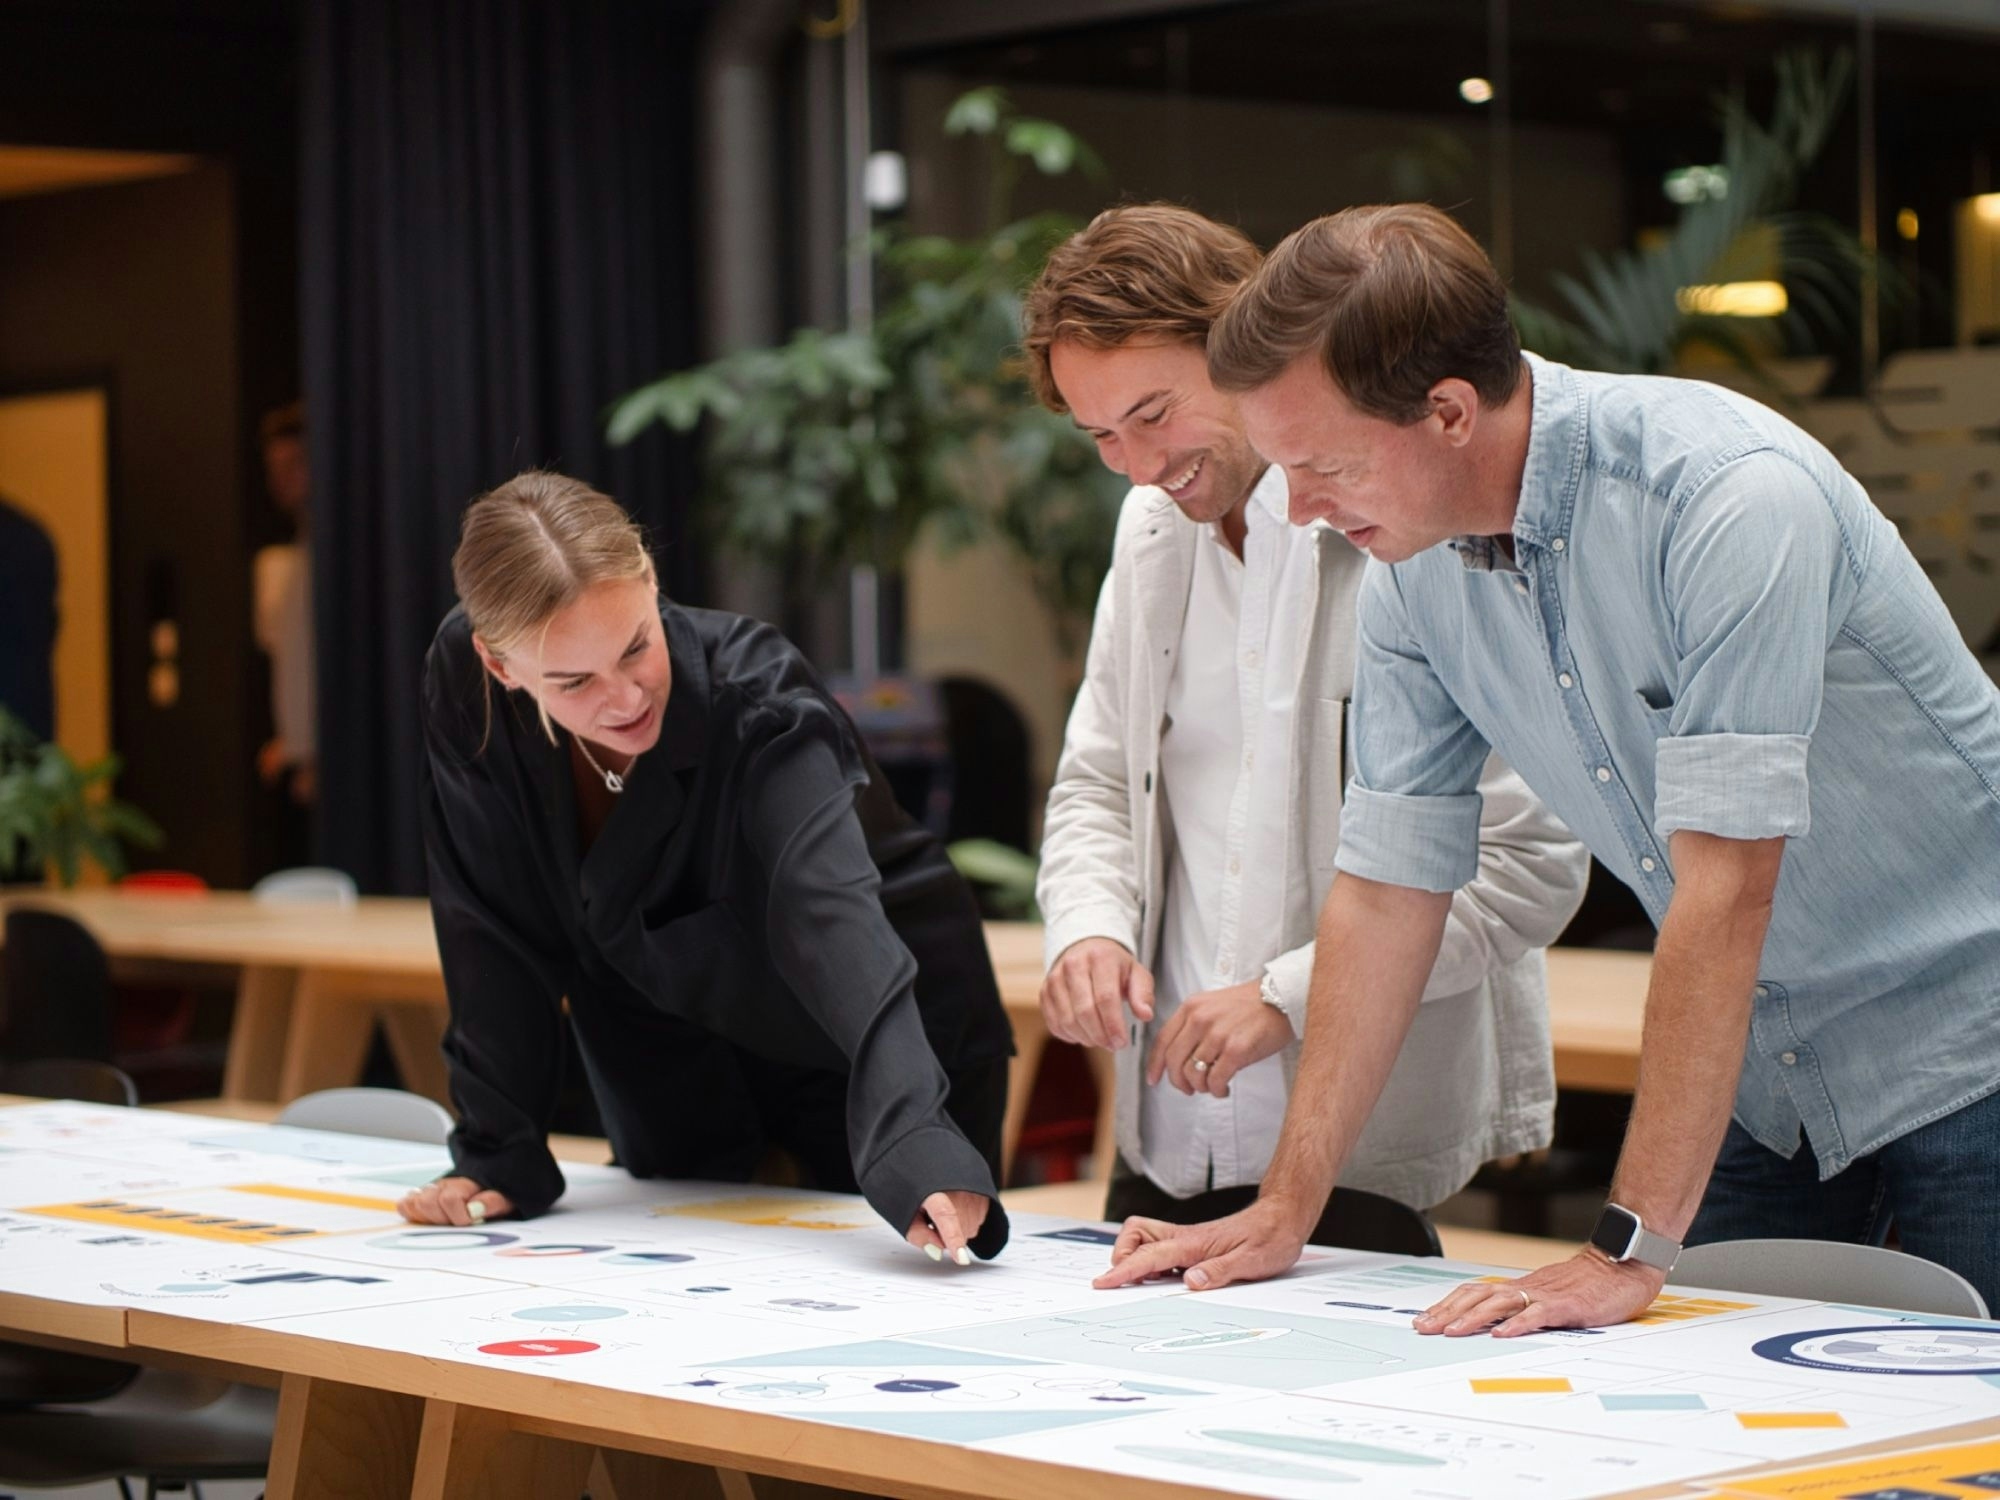 Three designers leaning over an insight map and discussing what they are looking at. Photo.